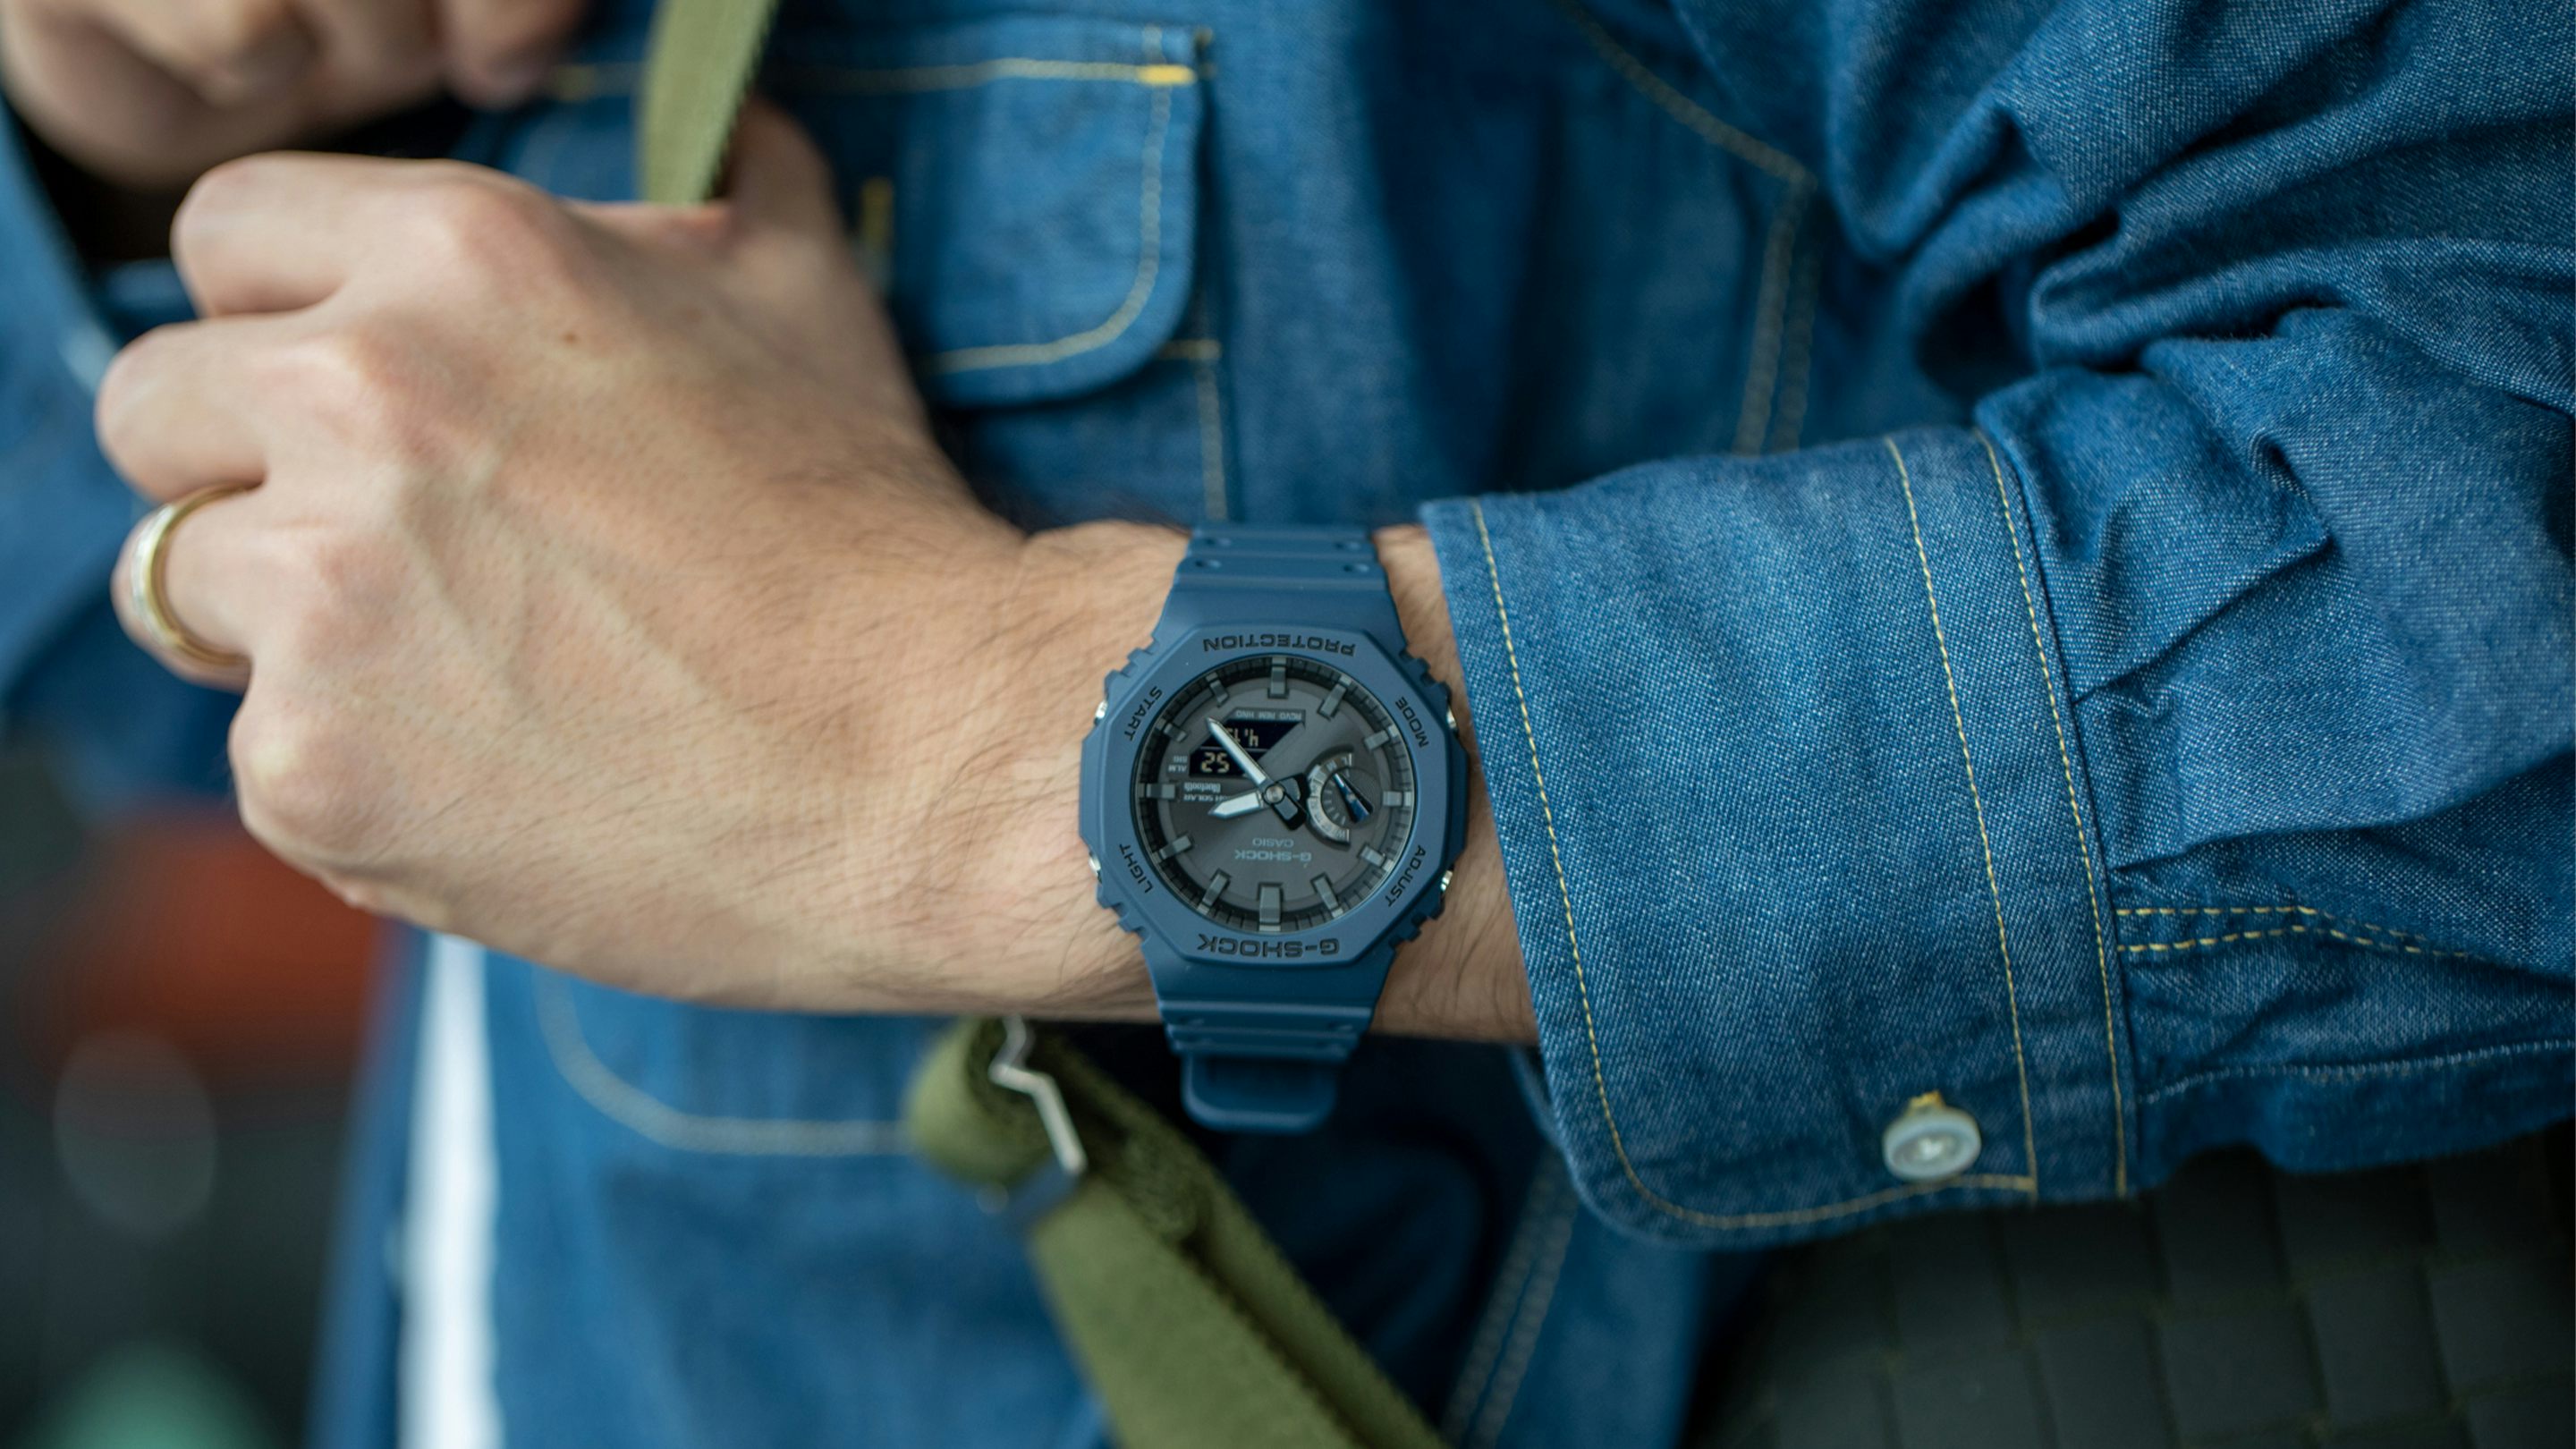 The new G-Shock GA-B2100 Adds Serious Functionality To The CasiOak Design